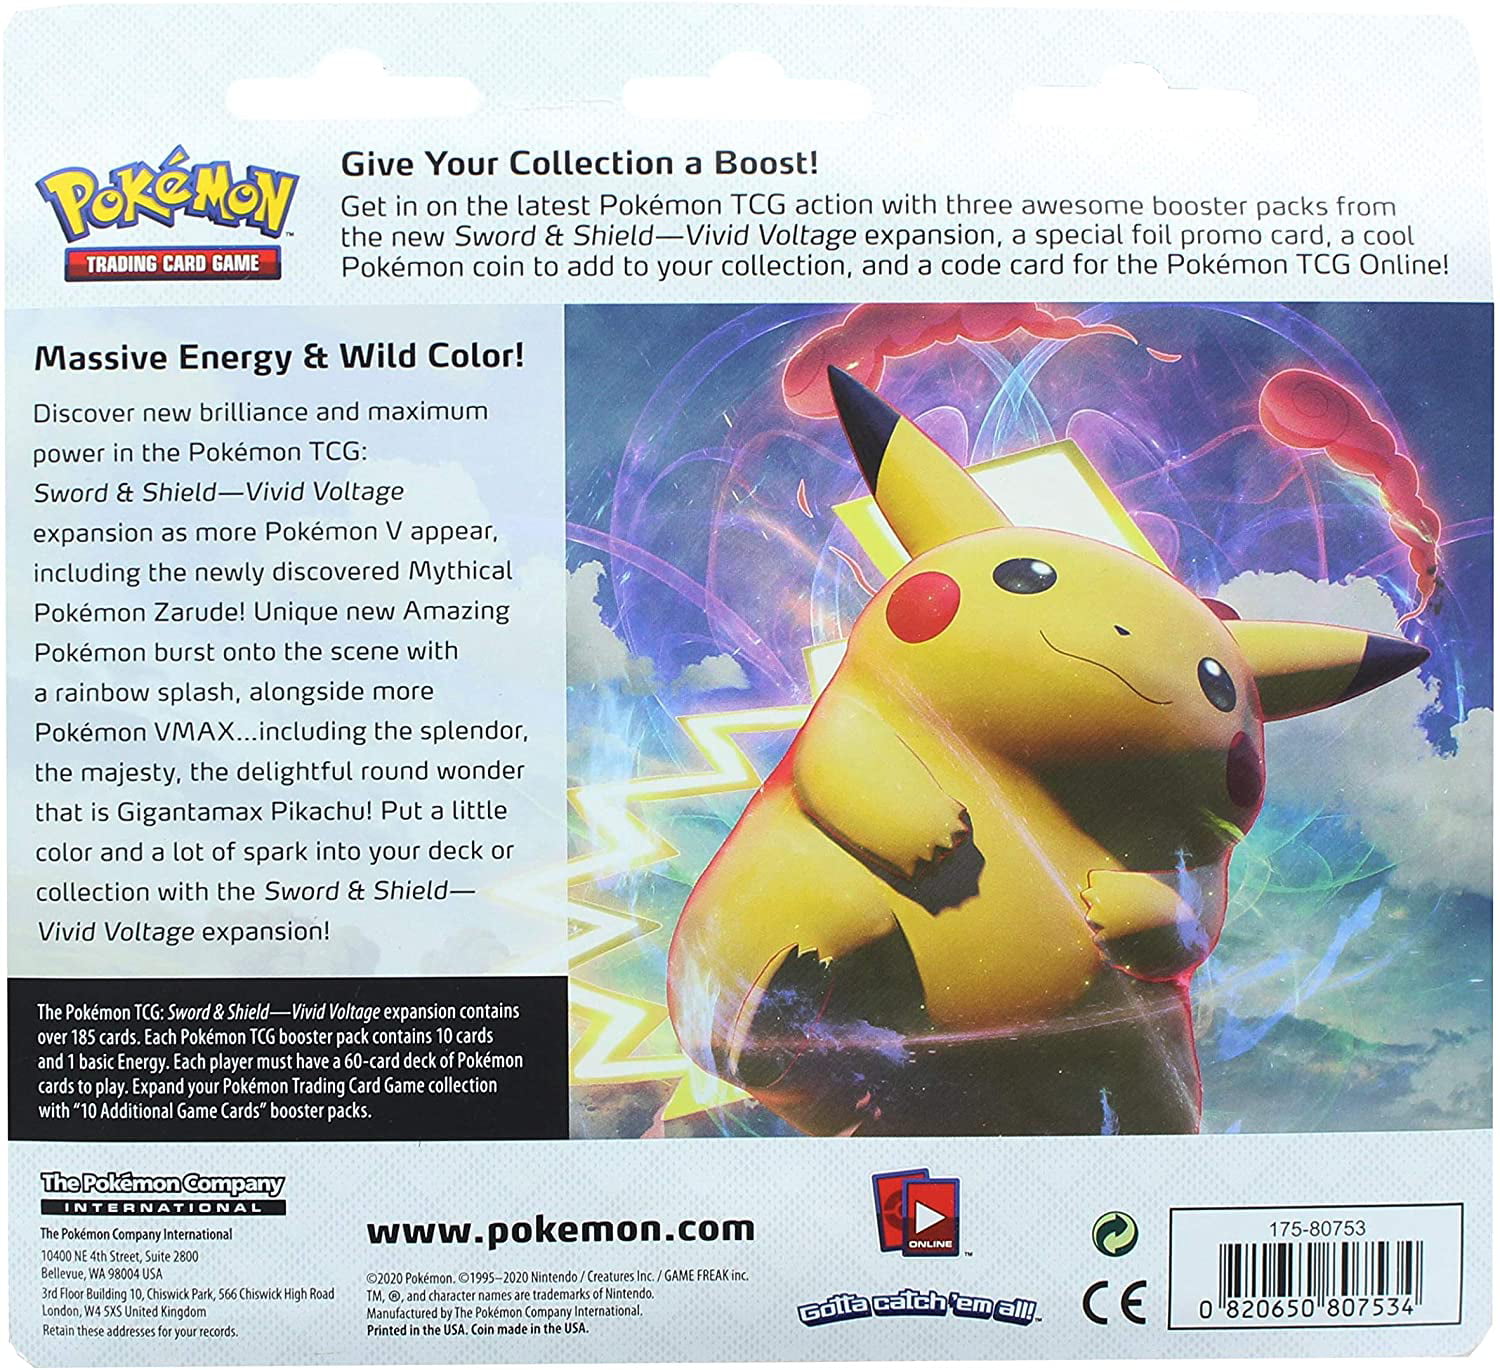 1 THREE Booster Pack Blister! Details about   Pokémon TCG Darkness Ablaze Blister Pack!